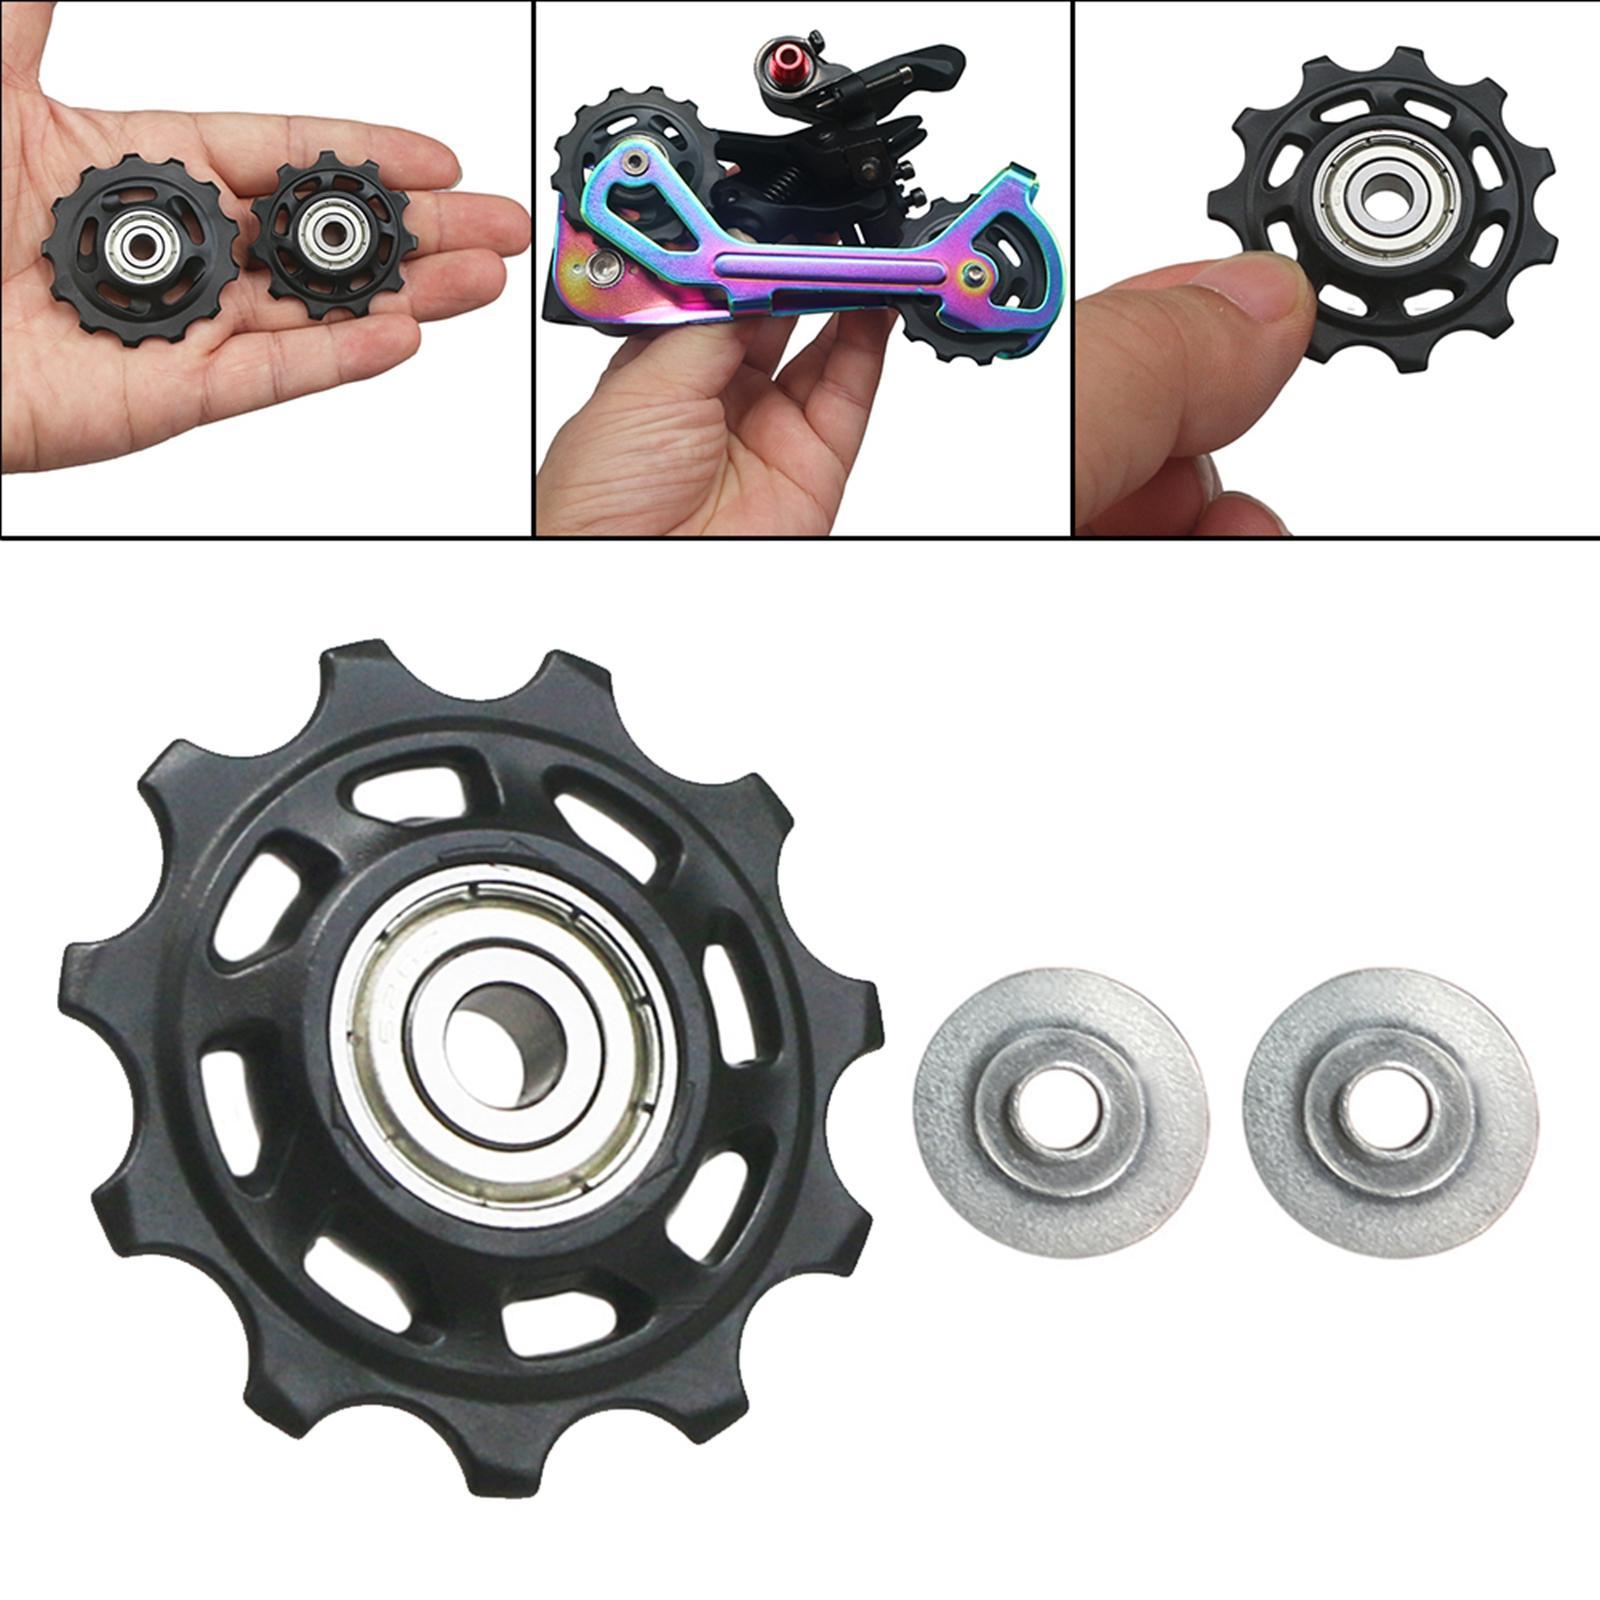 2x  Rear Derailleur Pulley Aluminum Alloy Replacement Parts Sealed Bearing Jockey   Roller